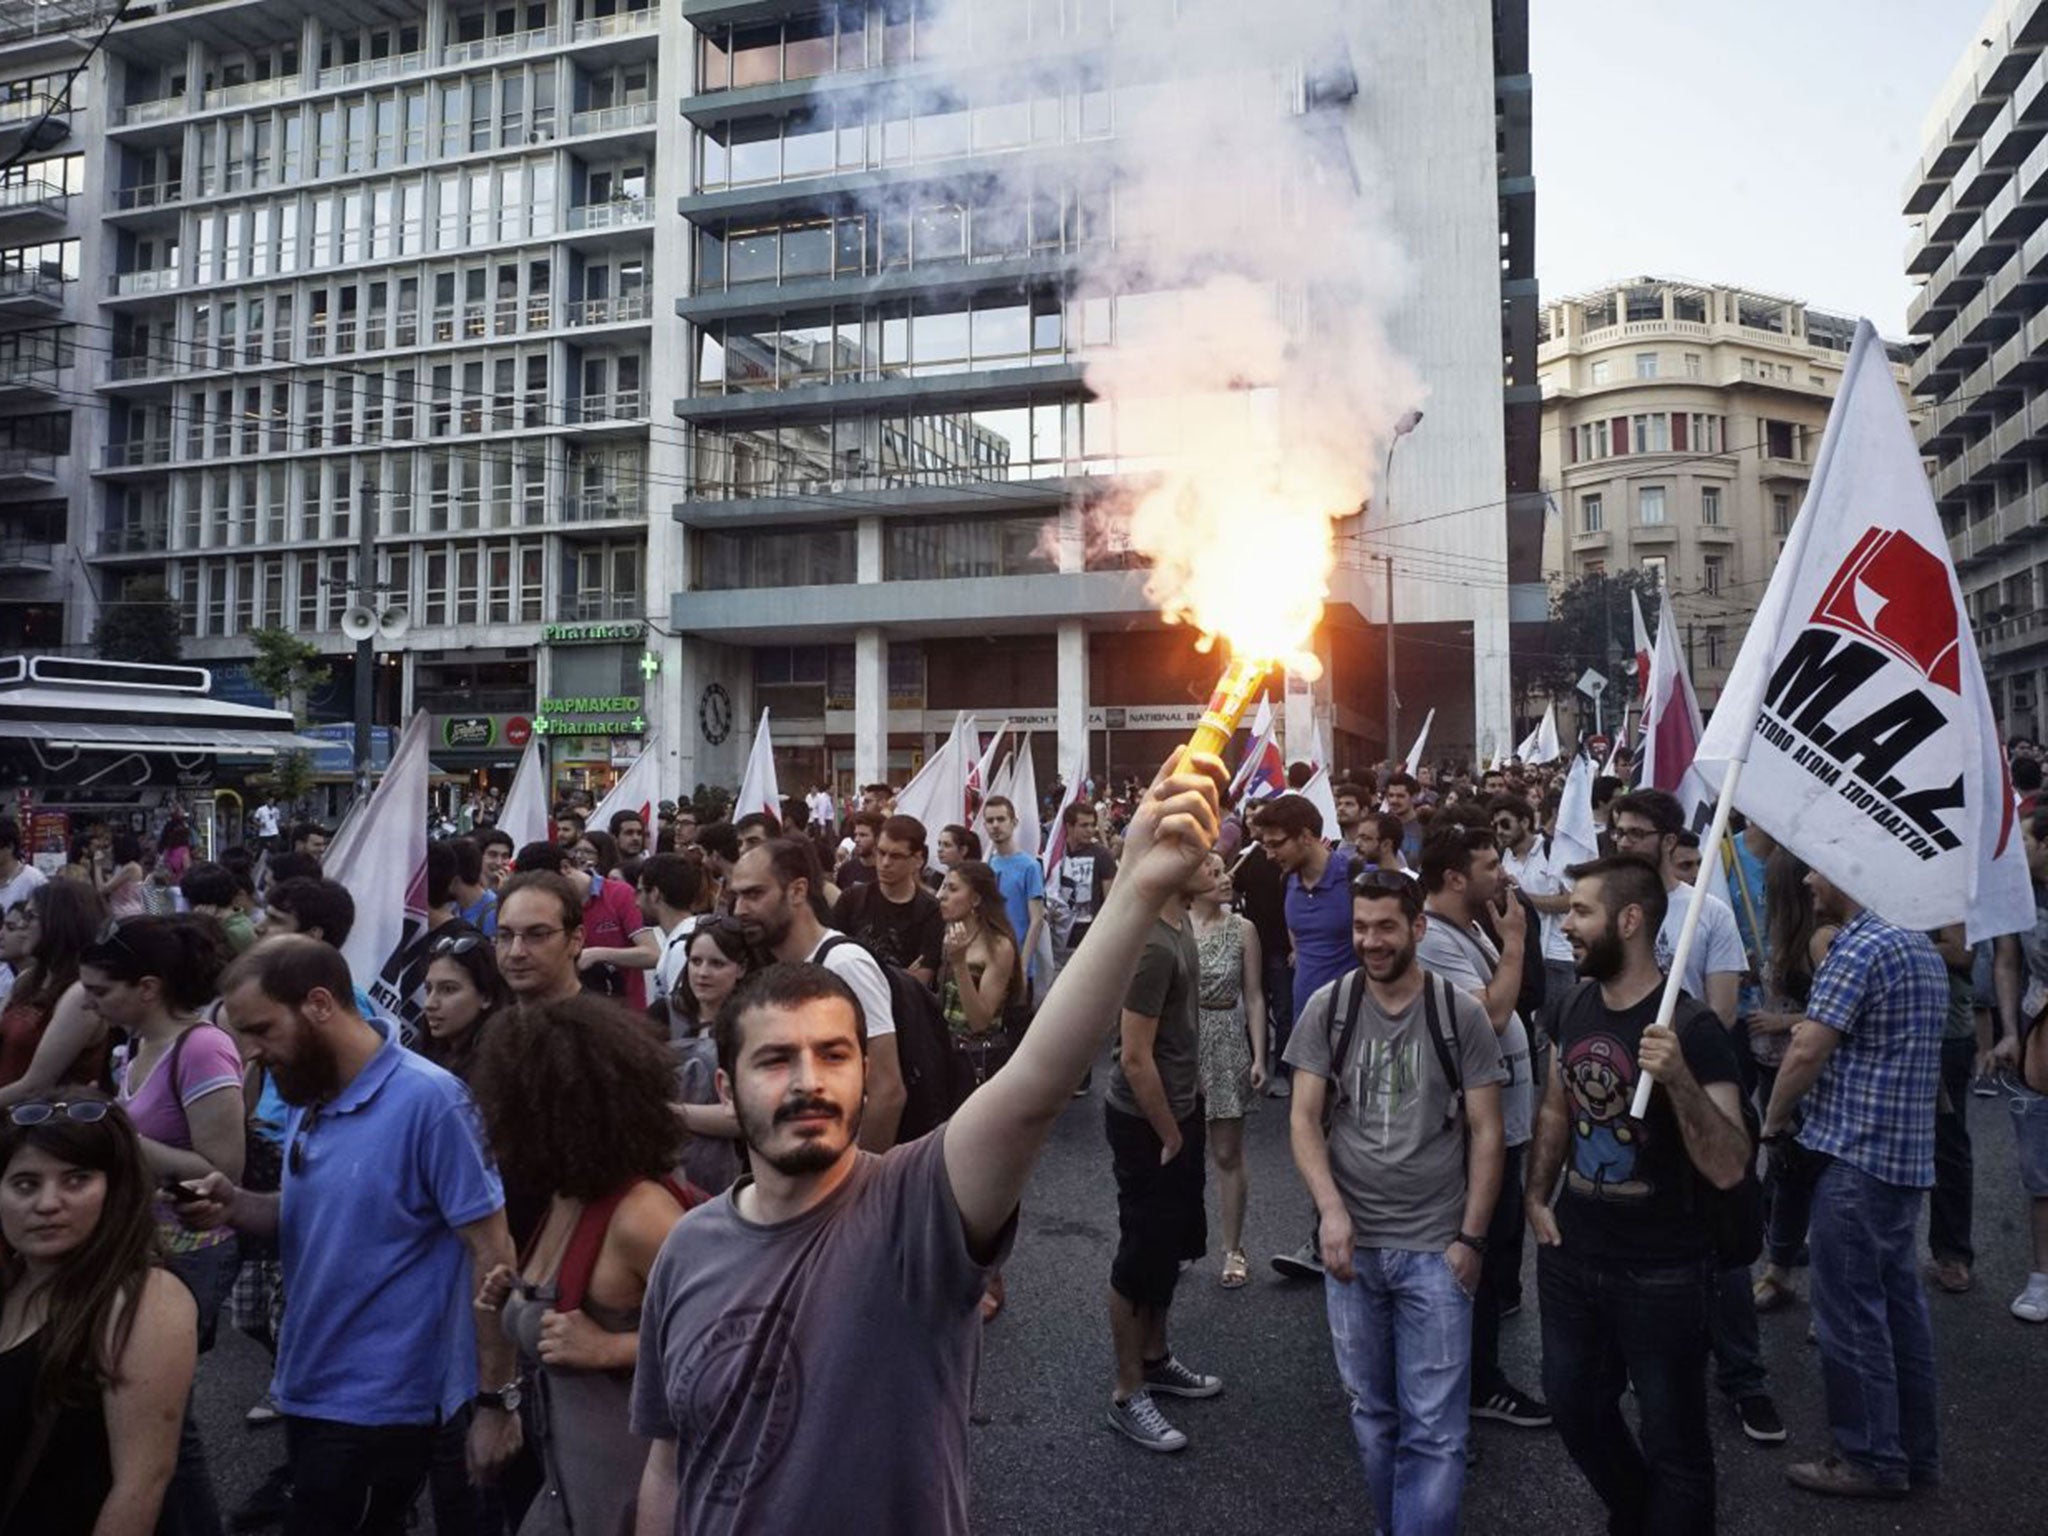 Supporters of the union PAME take part in an anti-austerity rally in Syntagma Square, Athens, in protest against the reforms demanded by Greece’s creditors